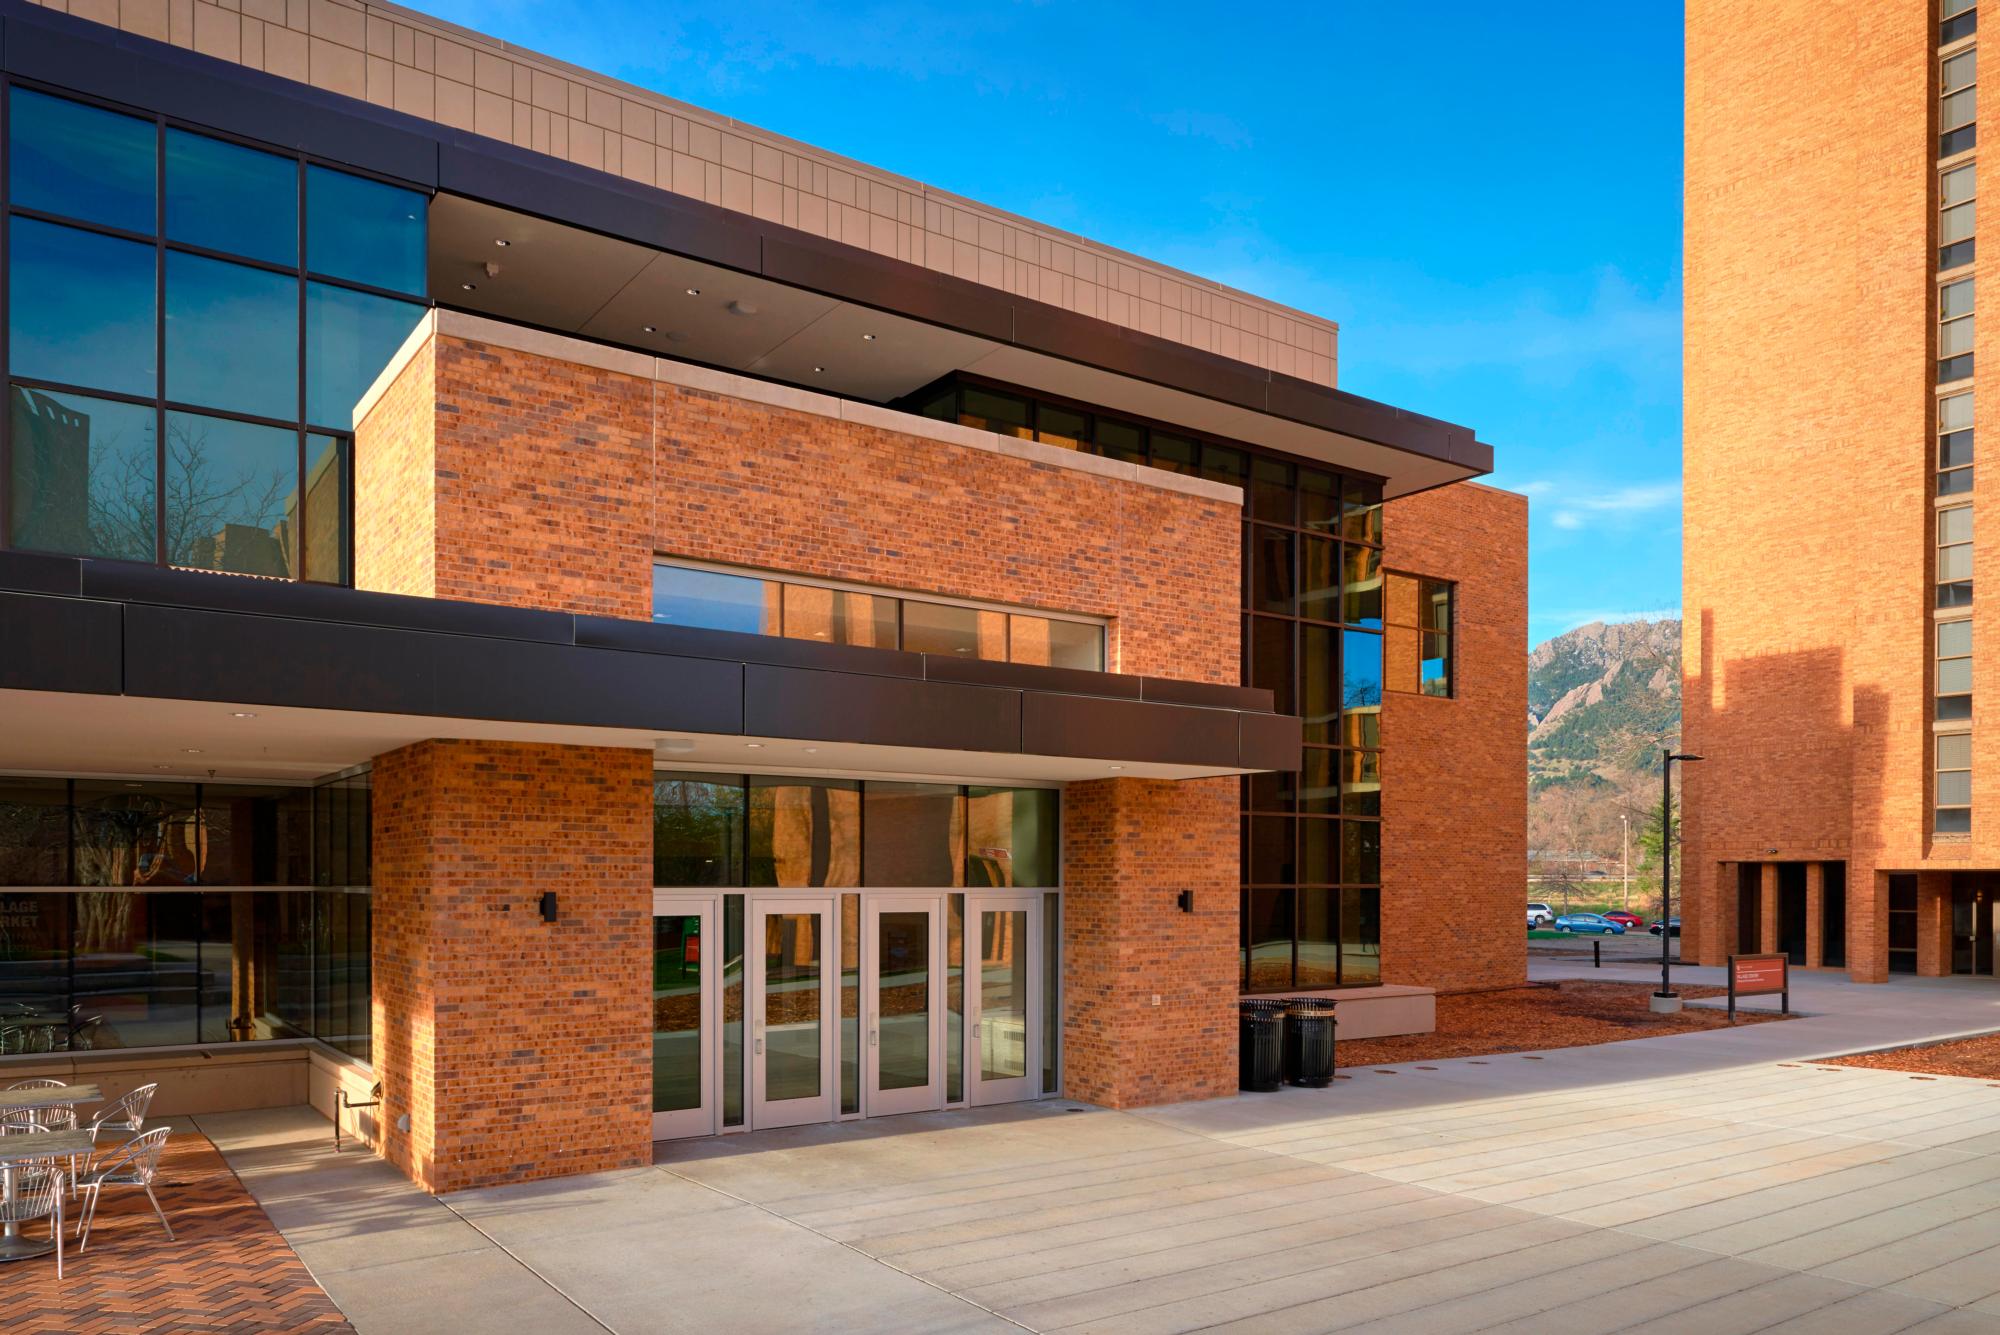 Image of the exterior of the University of Colorado Boulder Village Center